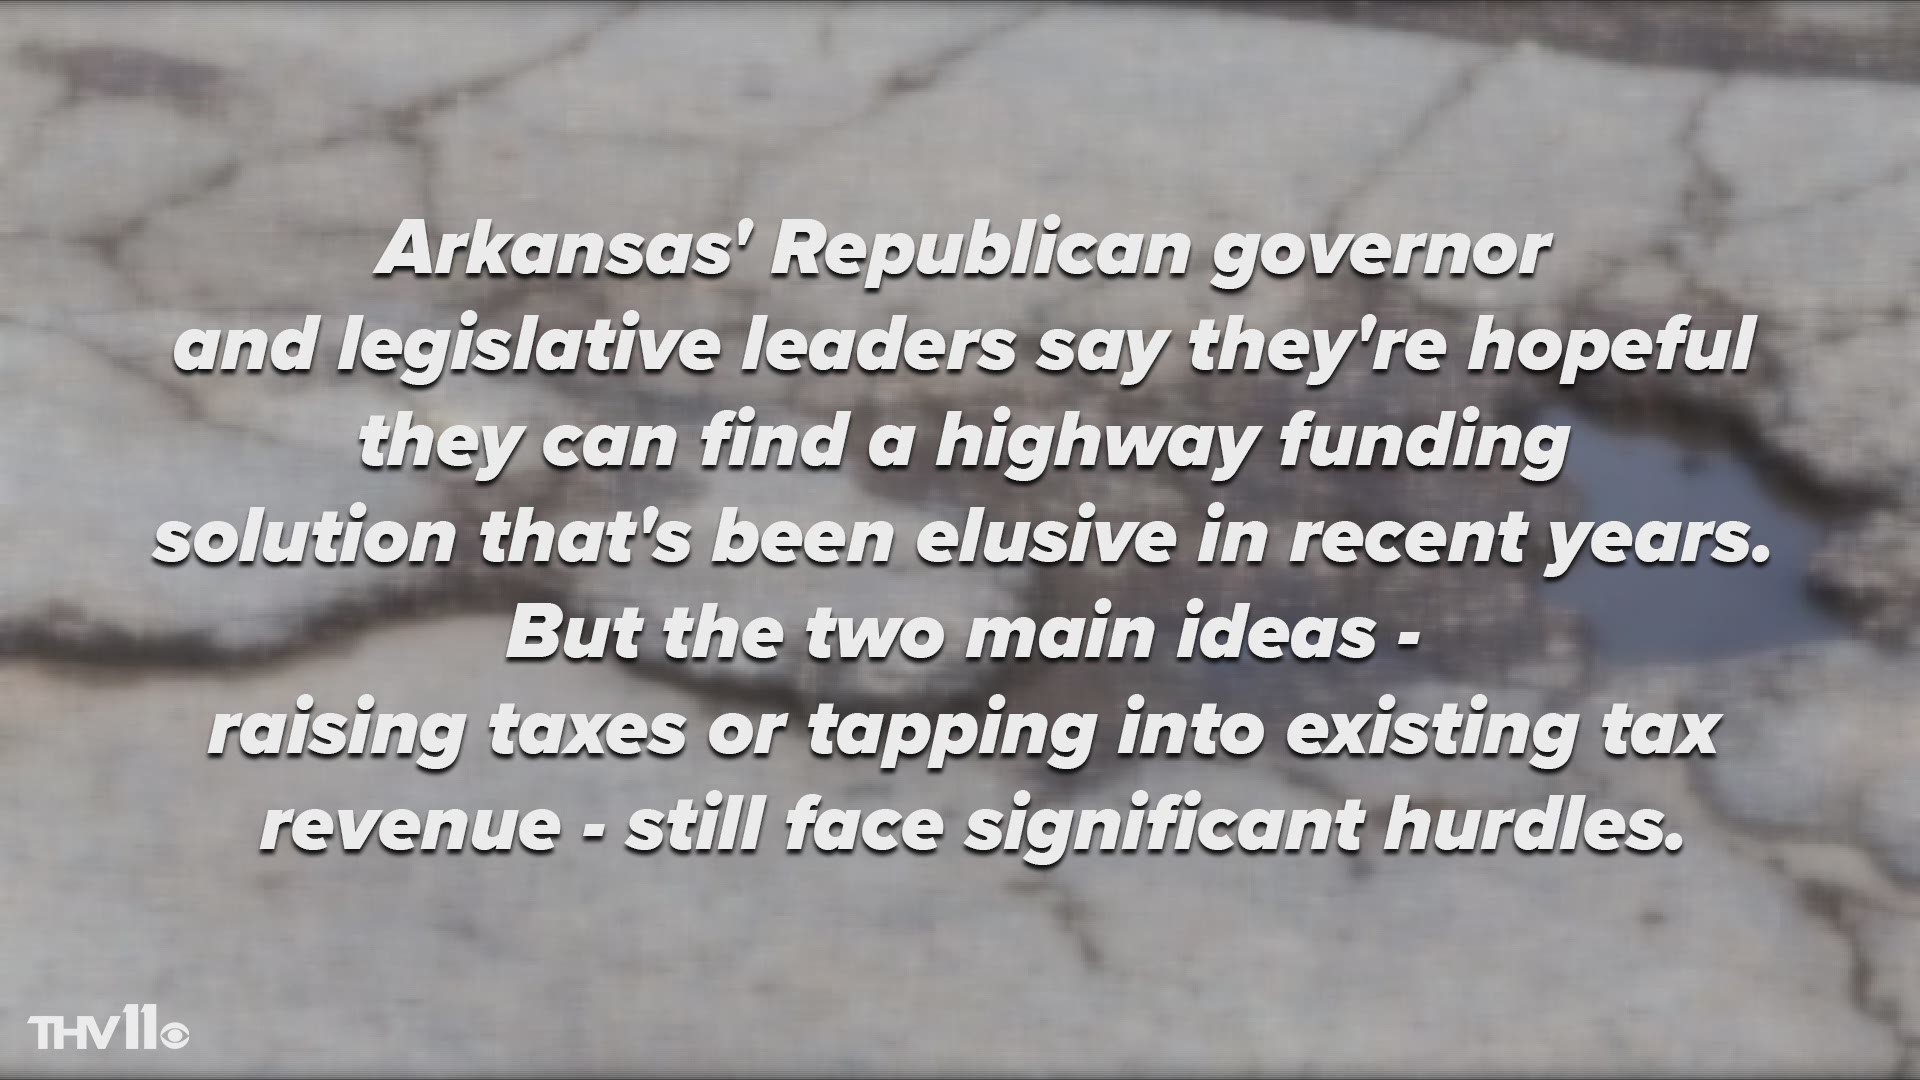 Arkansas governor, lawmakers hope for highway funding fix